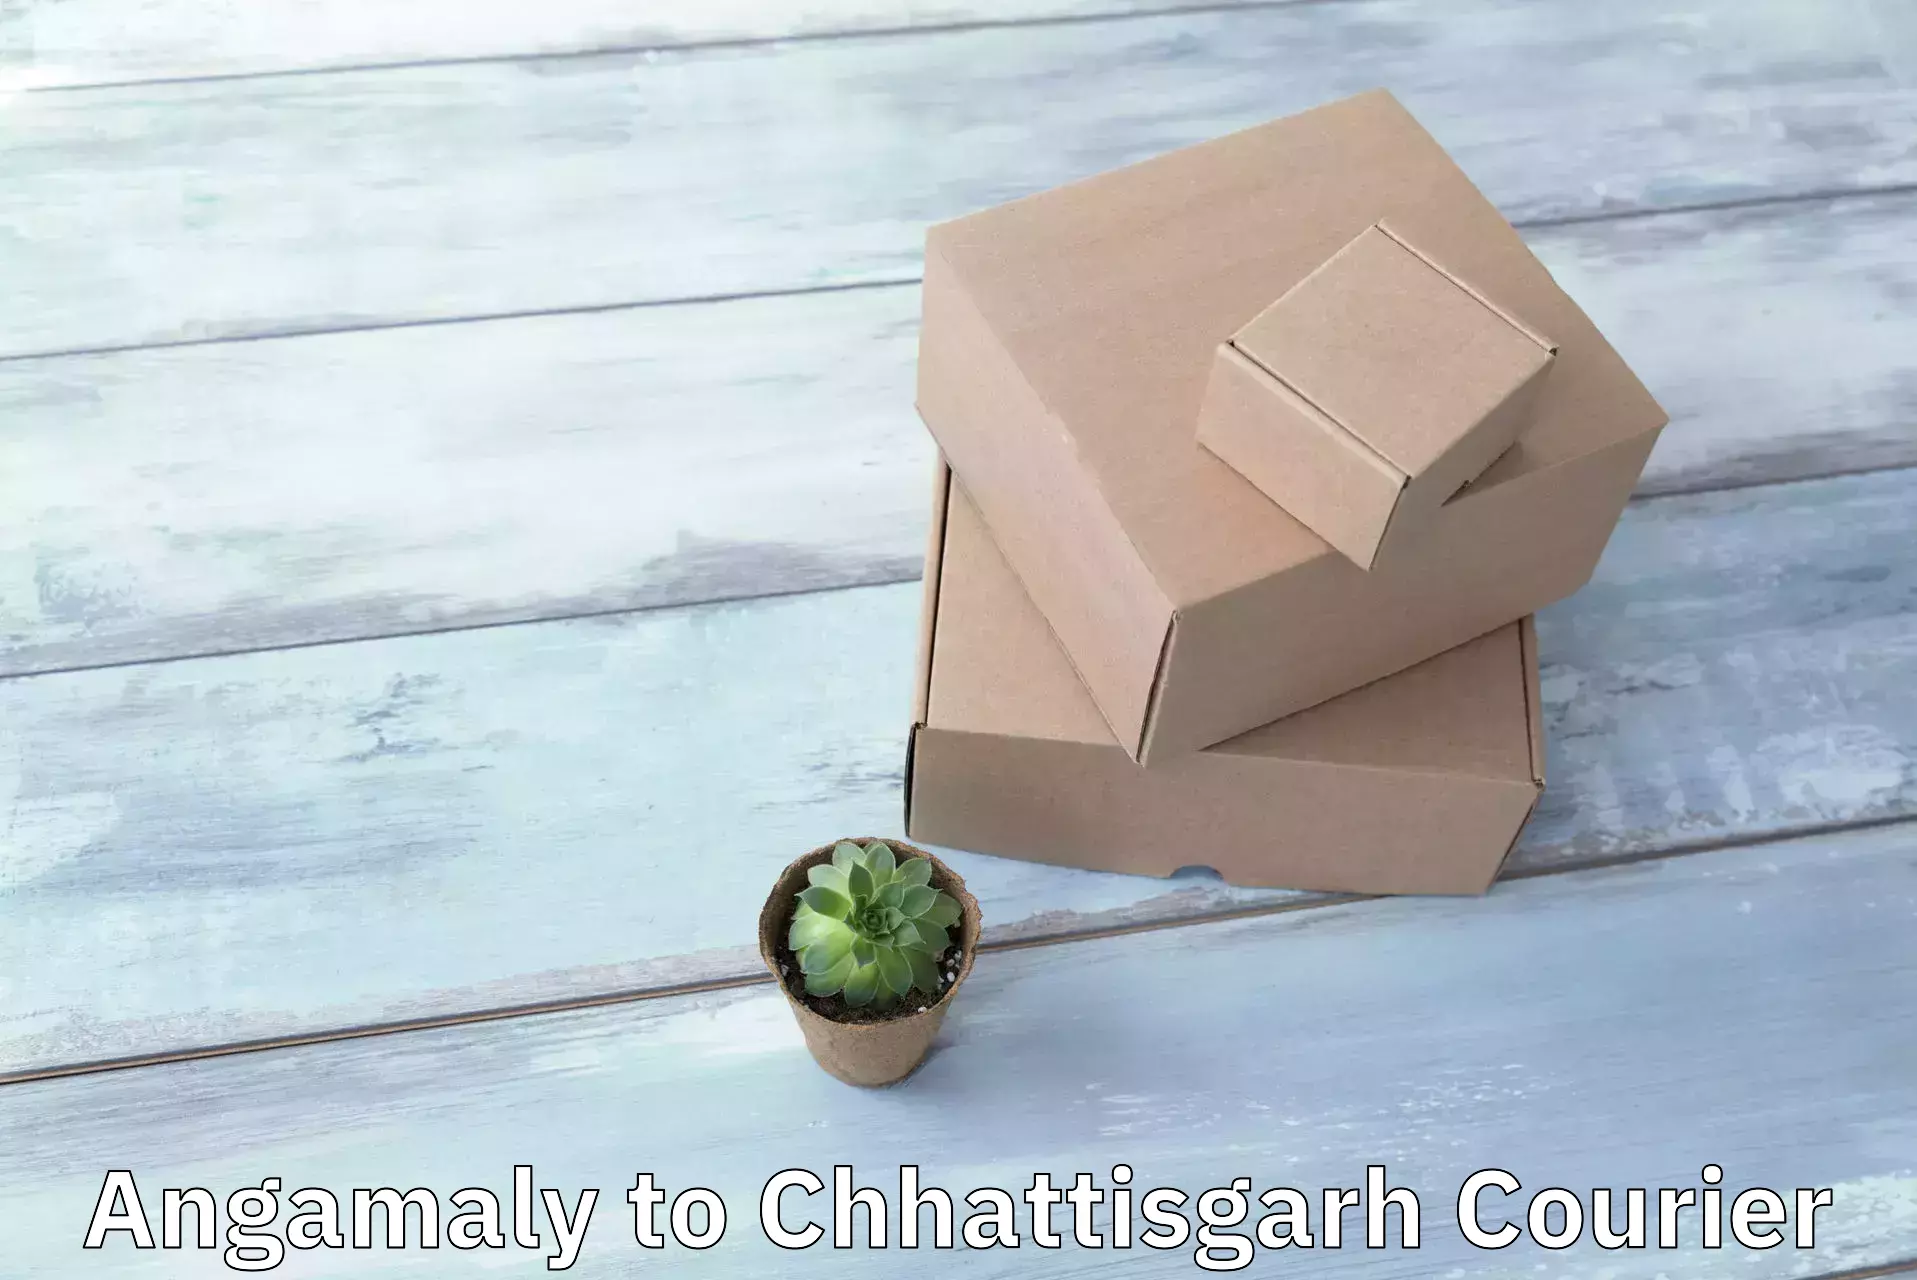 Subscription-based courier Angamaly to Patna Chhattisgarh